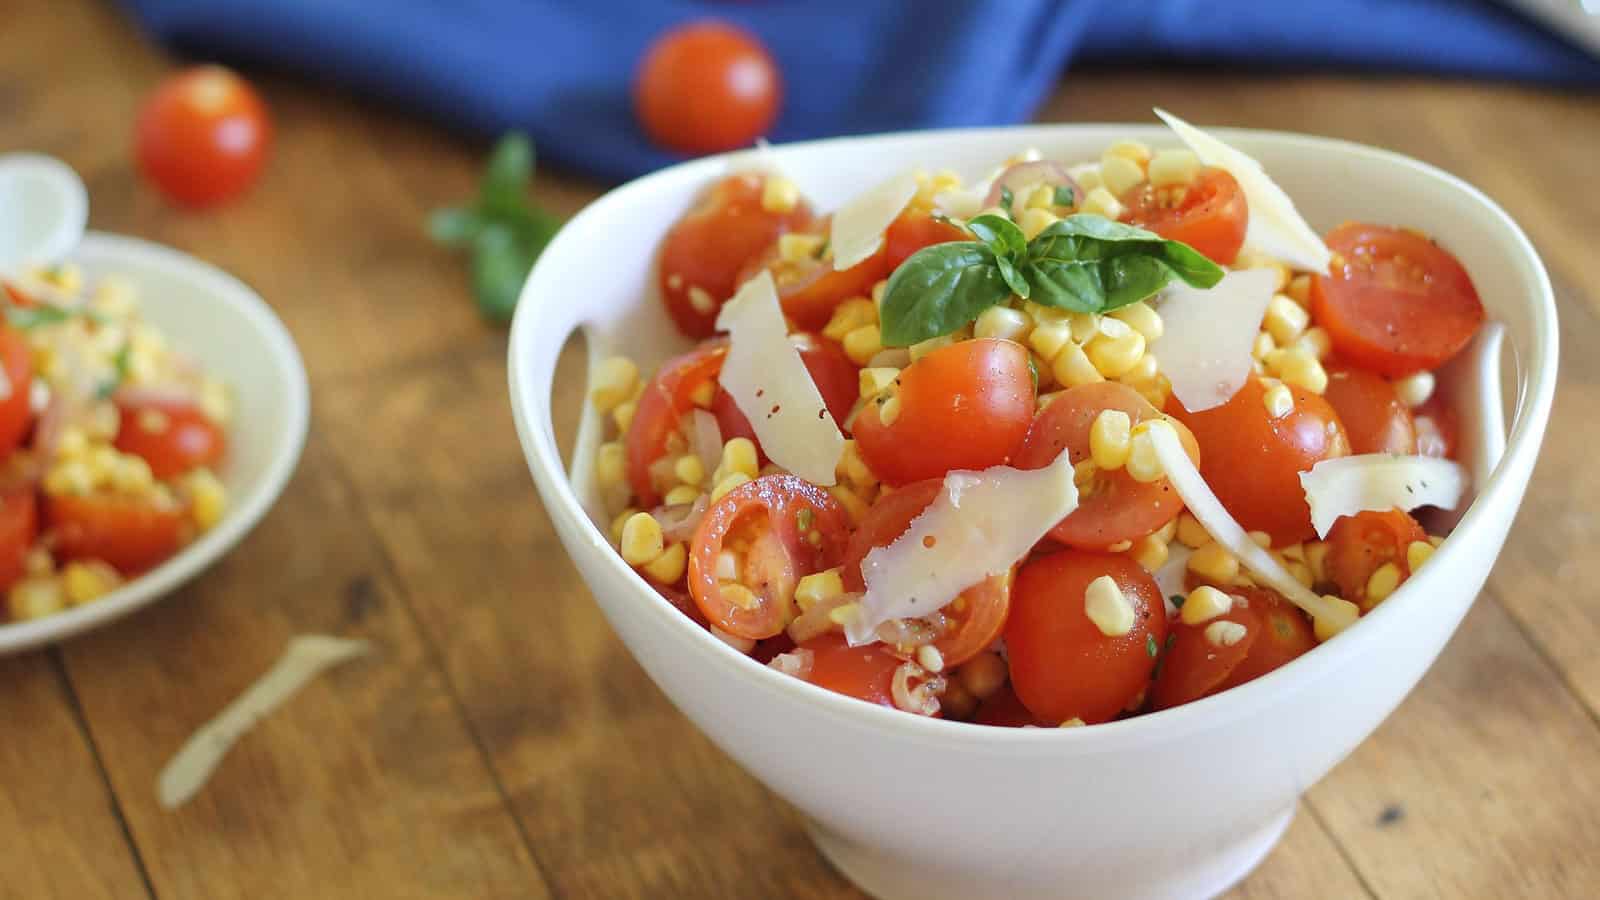 Tomato corn salad with shaved parmesan and basil garnish in white bowl.